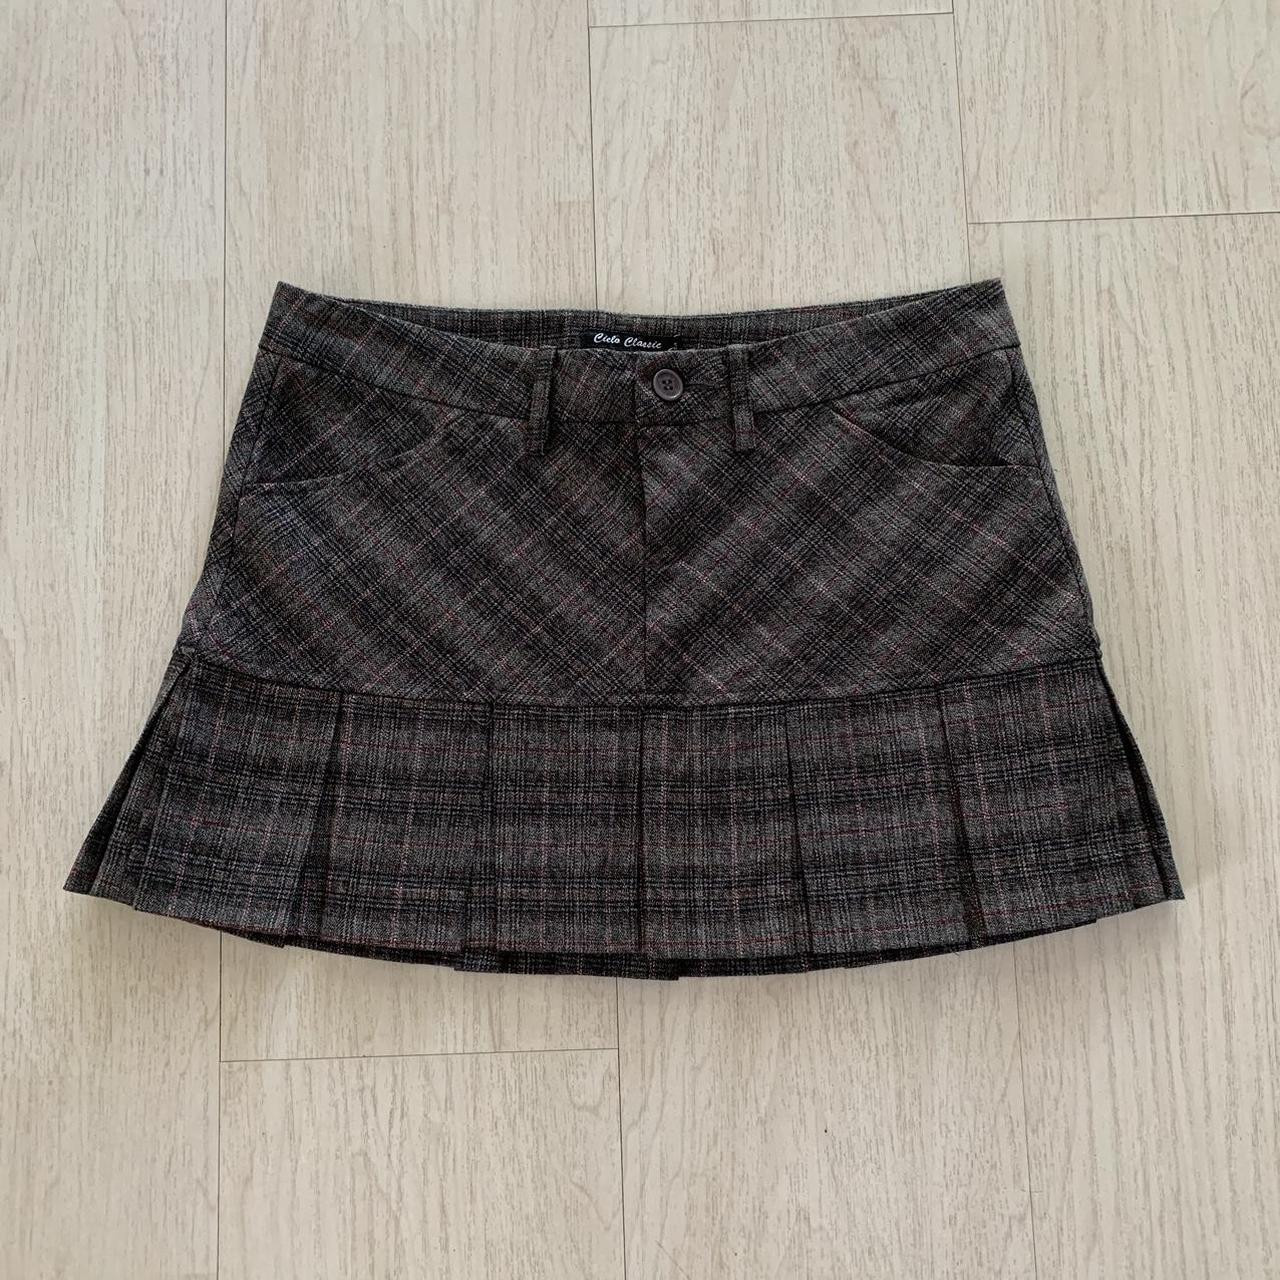 Early 2000s y2k grey and burgundy plaid with silver... - Depop